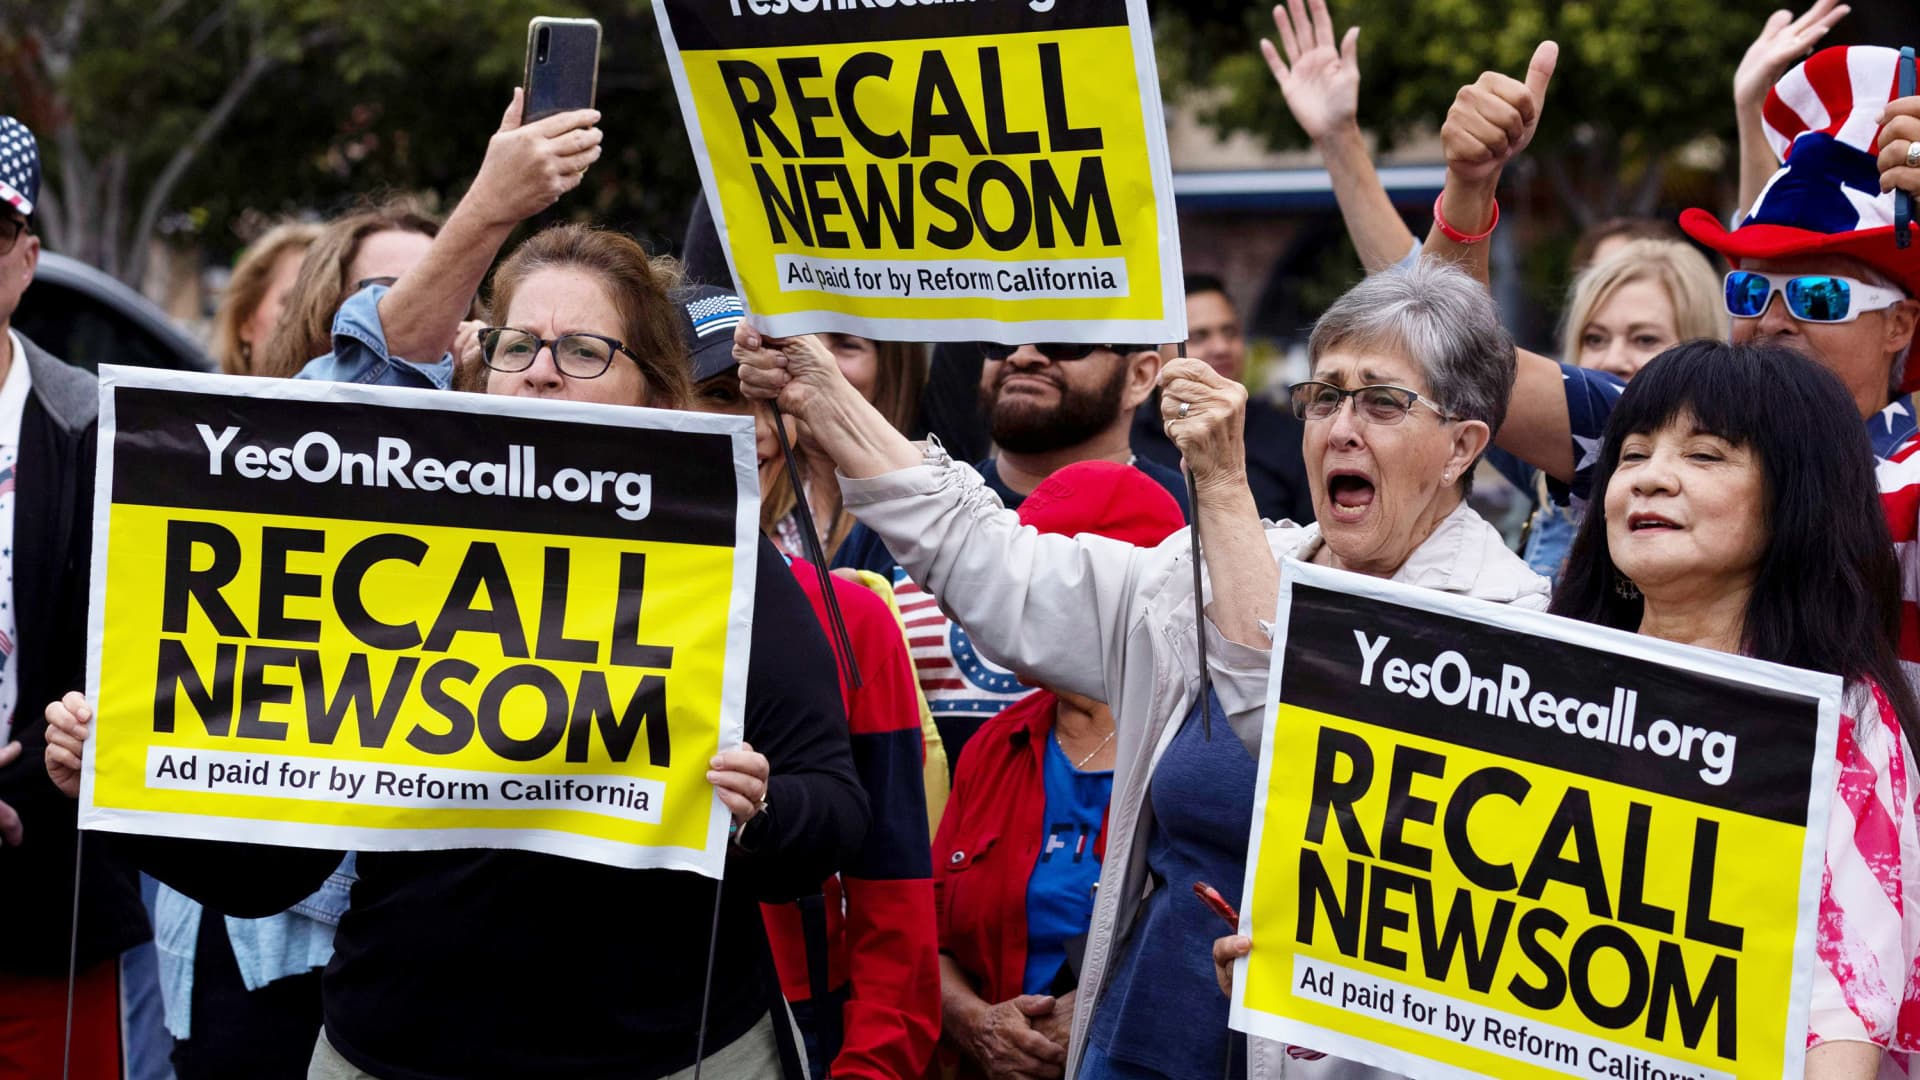 Supporters of the recall campaign of California governor Gavin Newsom prepare for the upcoming recall election with a rally and information session in Carlsbad, California, June 30, 2021.